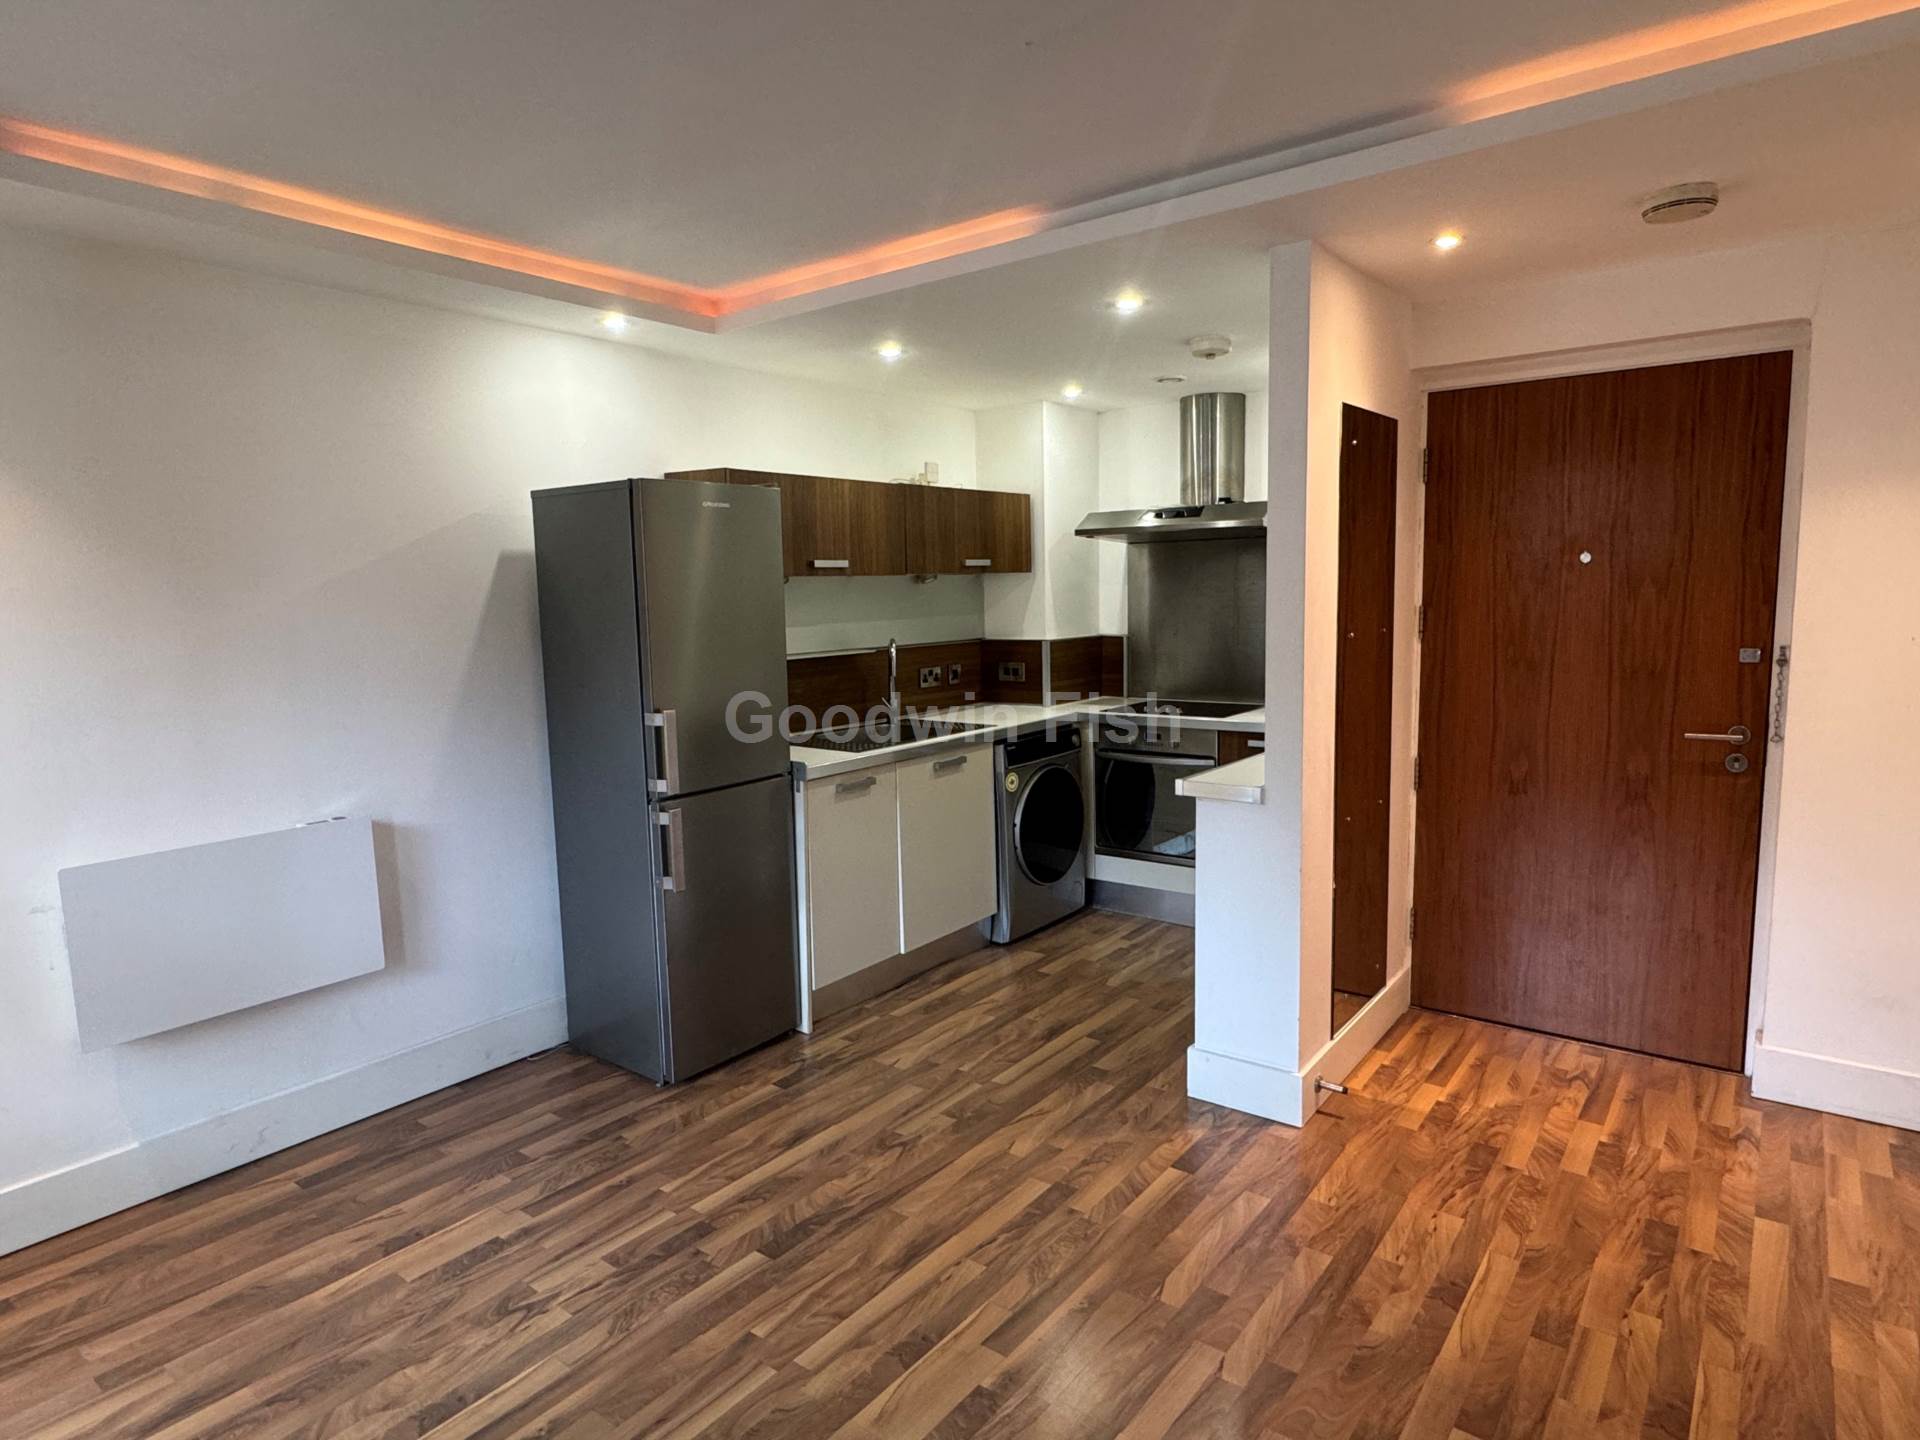 0 bed Apartment for rent in Manchester. From Goodwin Fish & Co - Manchester